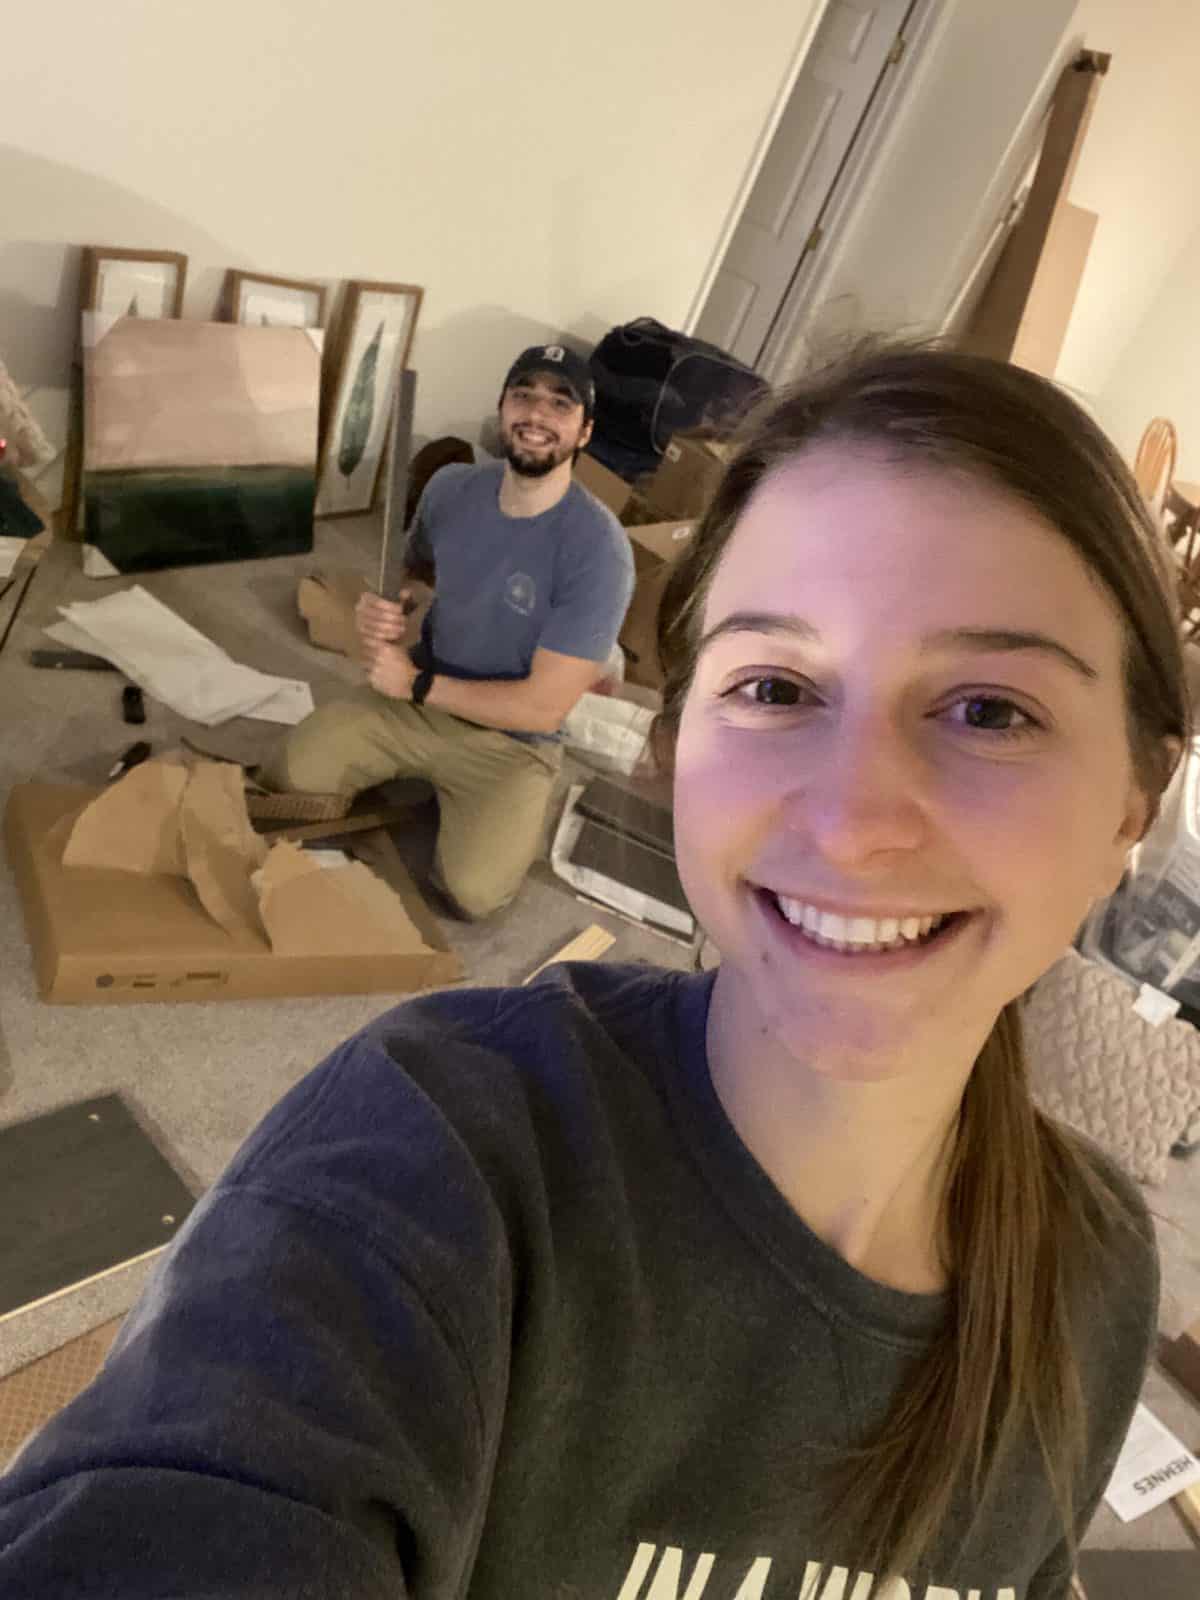 A girl taking a selfie with a man in the background assembling furniture.